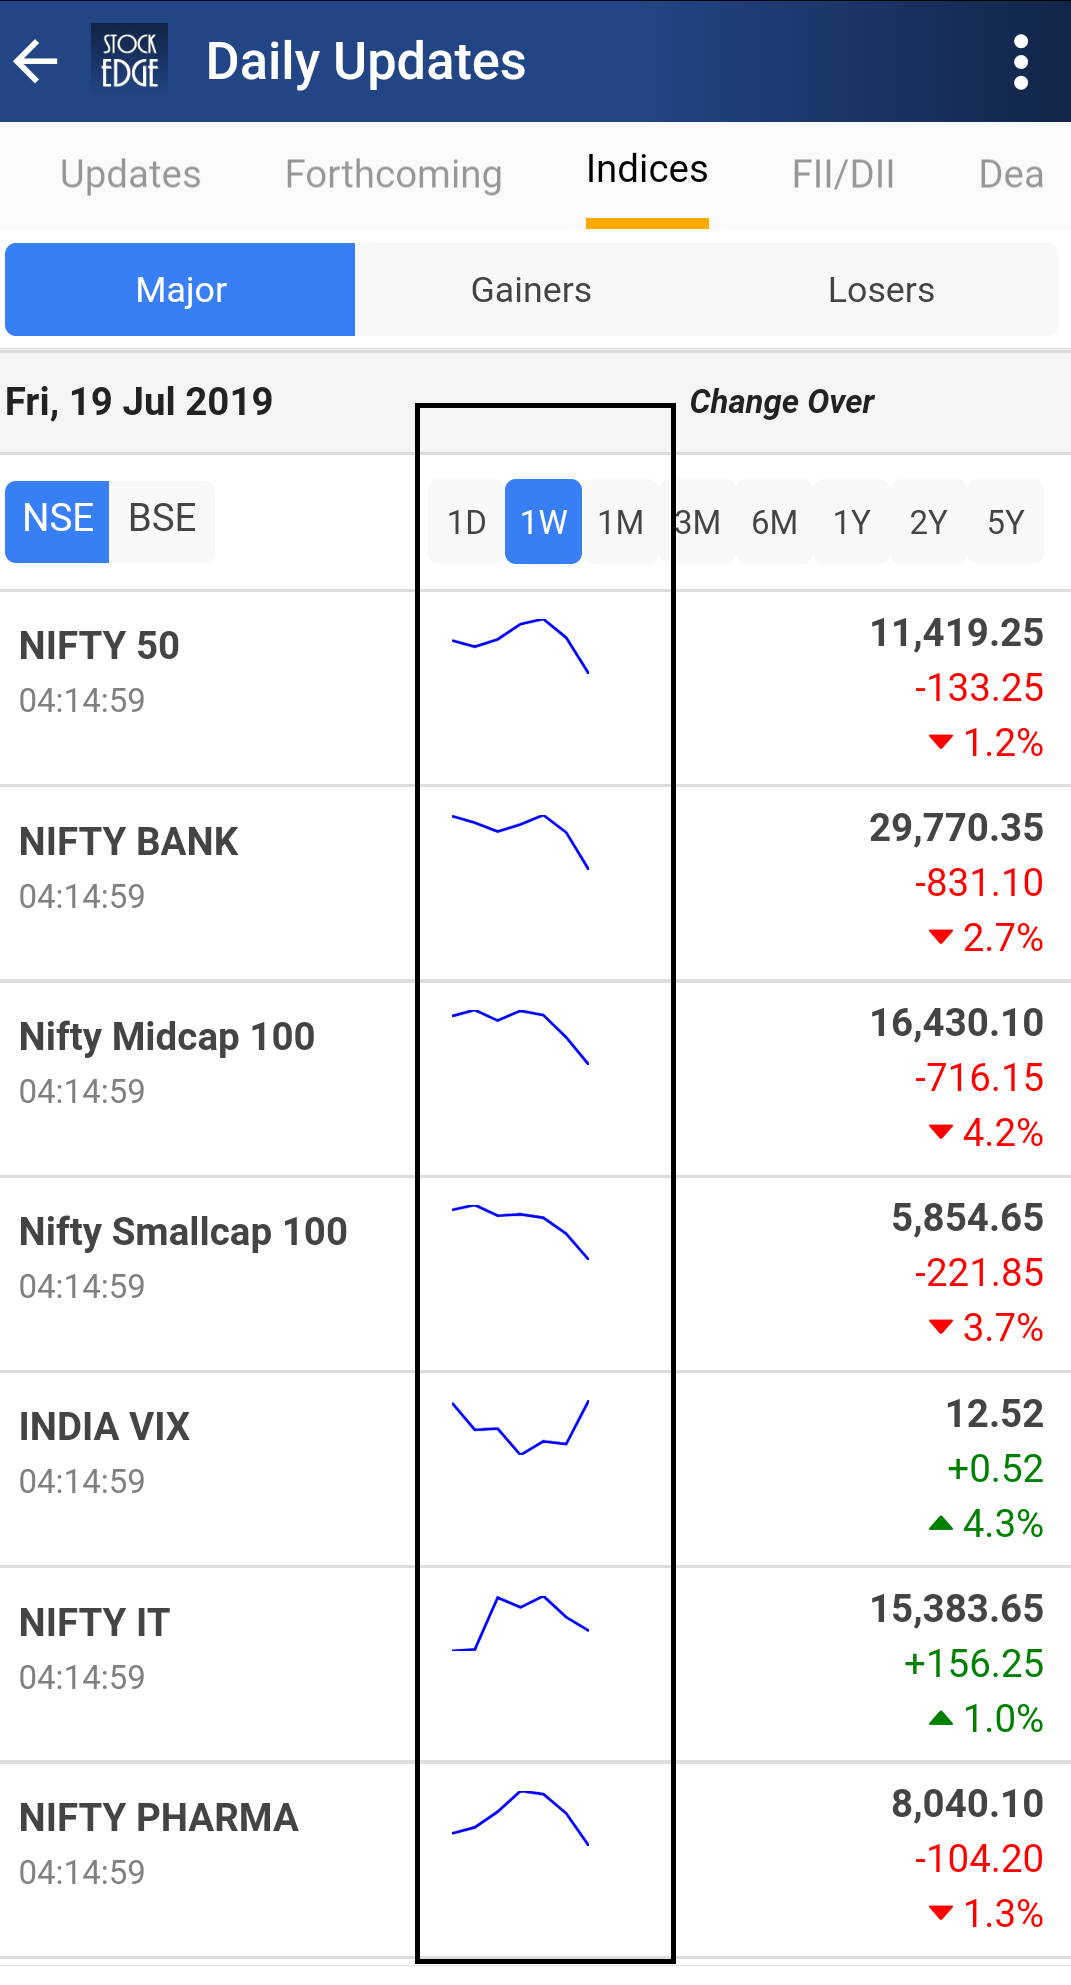 The image is a screenshot of a stockedge app showing the daily updates for various indices. The app is showing the change in percentage and points for each index. The app is also showing the time at which the data was last updated, the date for which the data is relevant, and the time frame for which the data is relevant. The indices shown are nifty bank, nifty midcap, nifty smallcap, india vix, and nifty pharma.